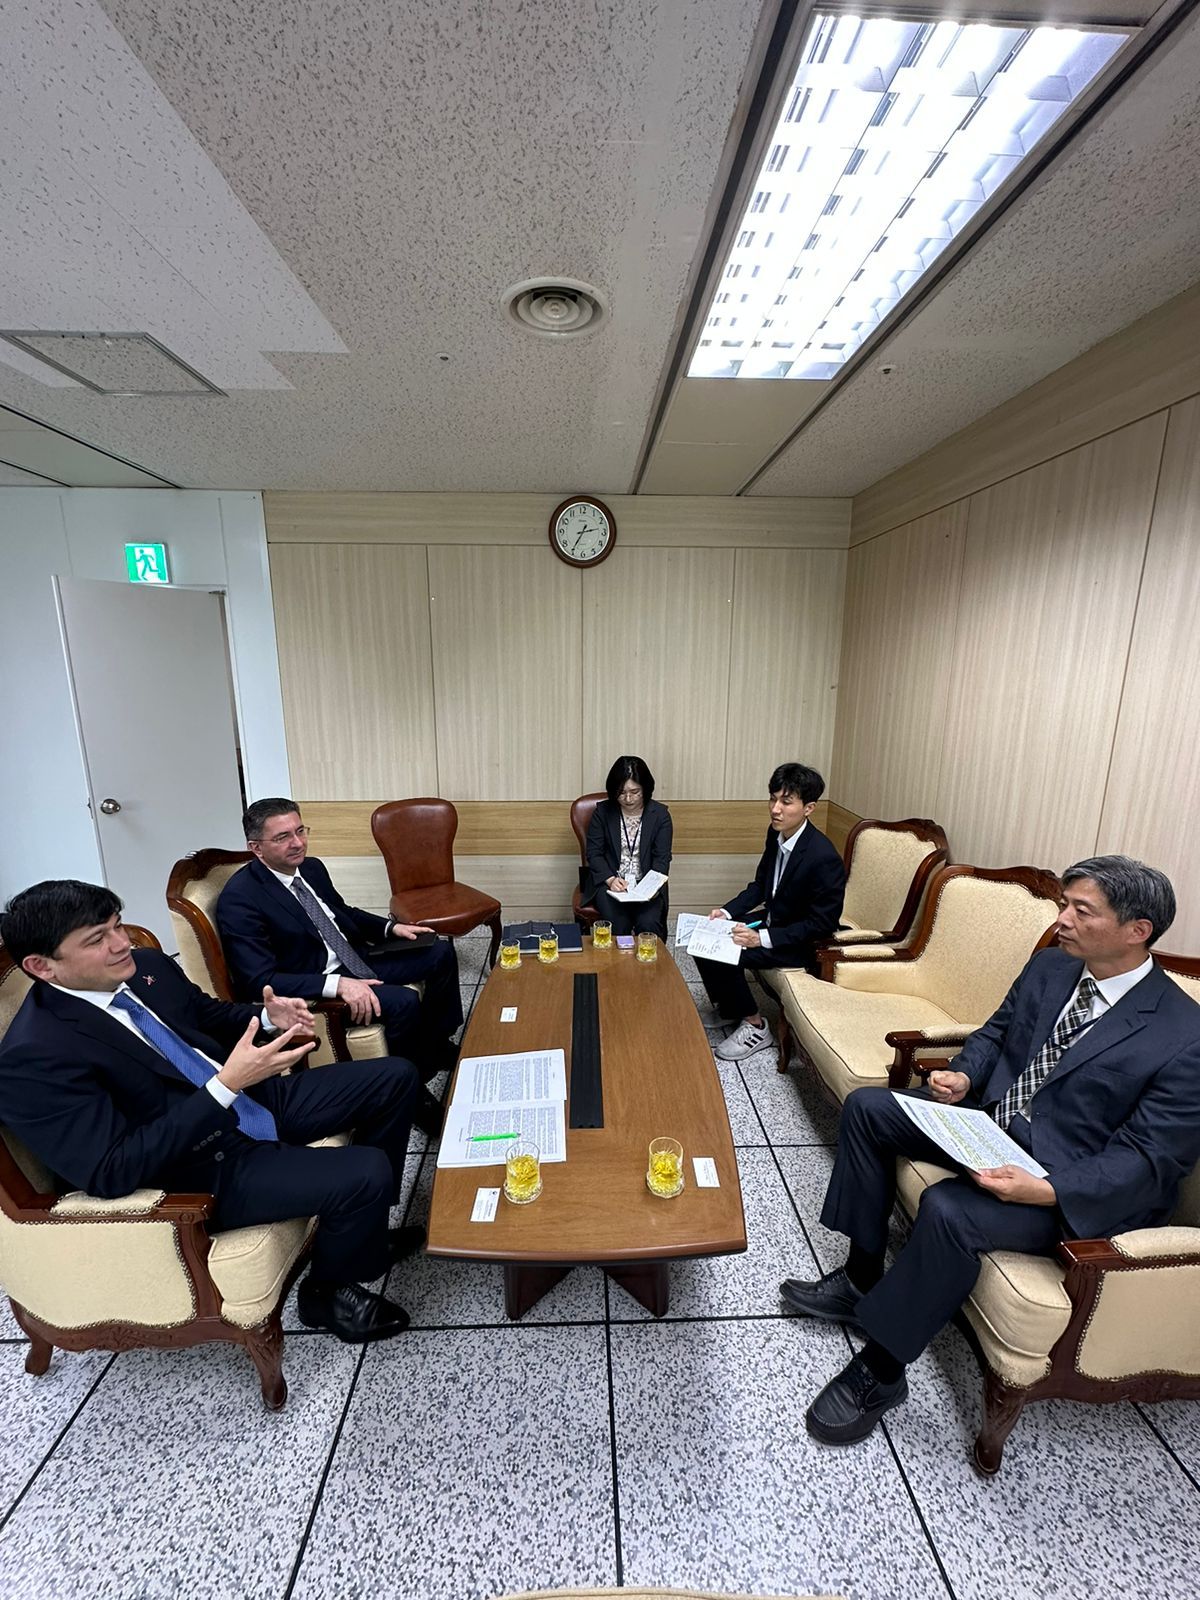 Meetings were held at the Ministry of Foreign Affairs and the National Assembly of Korea